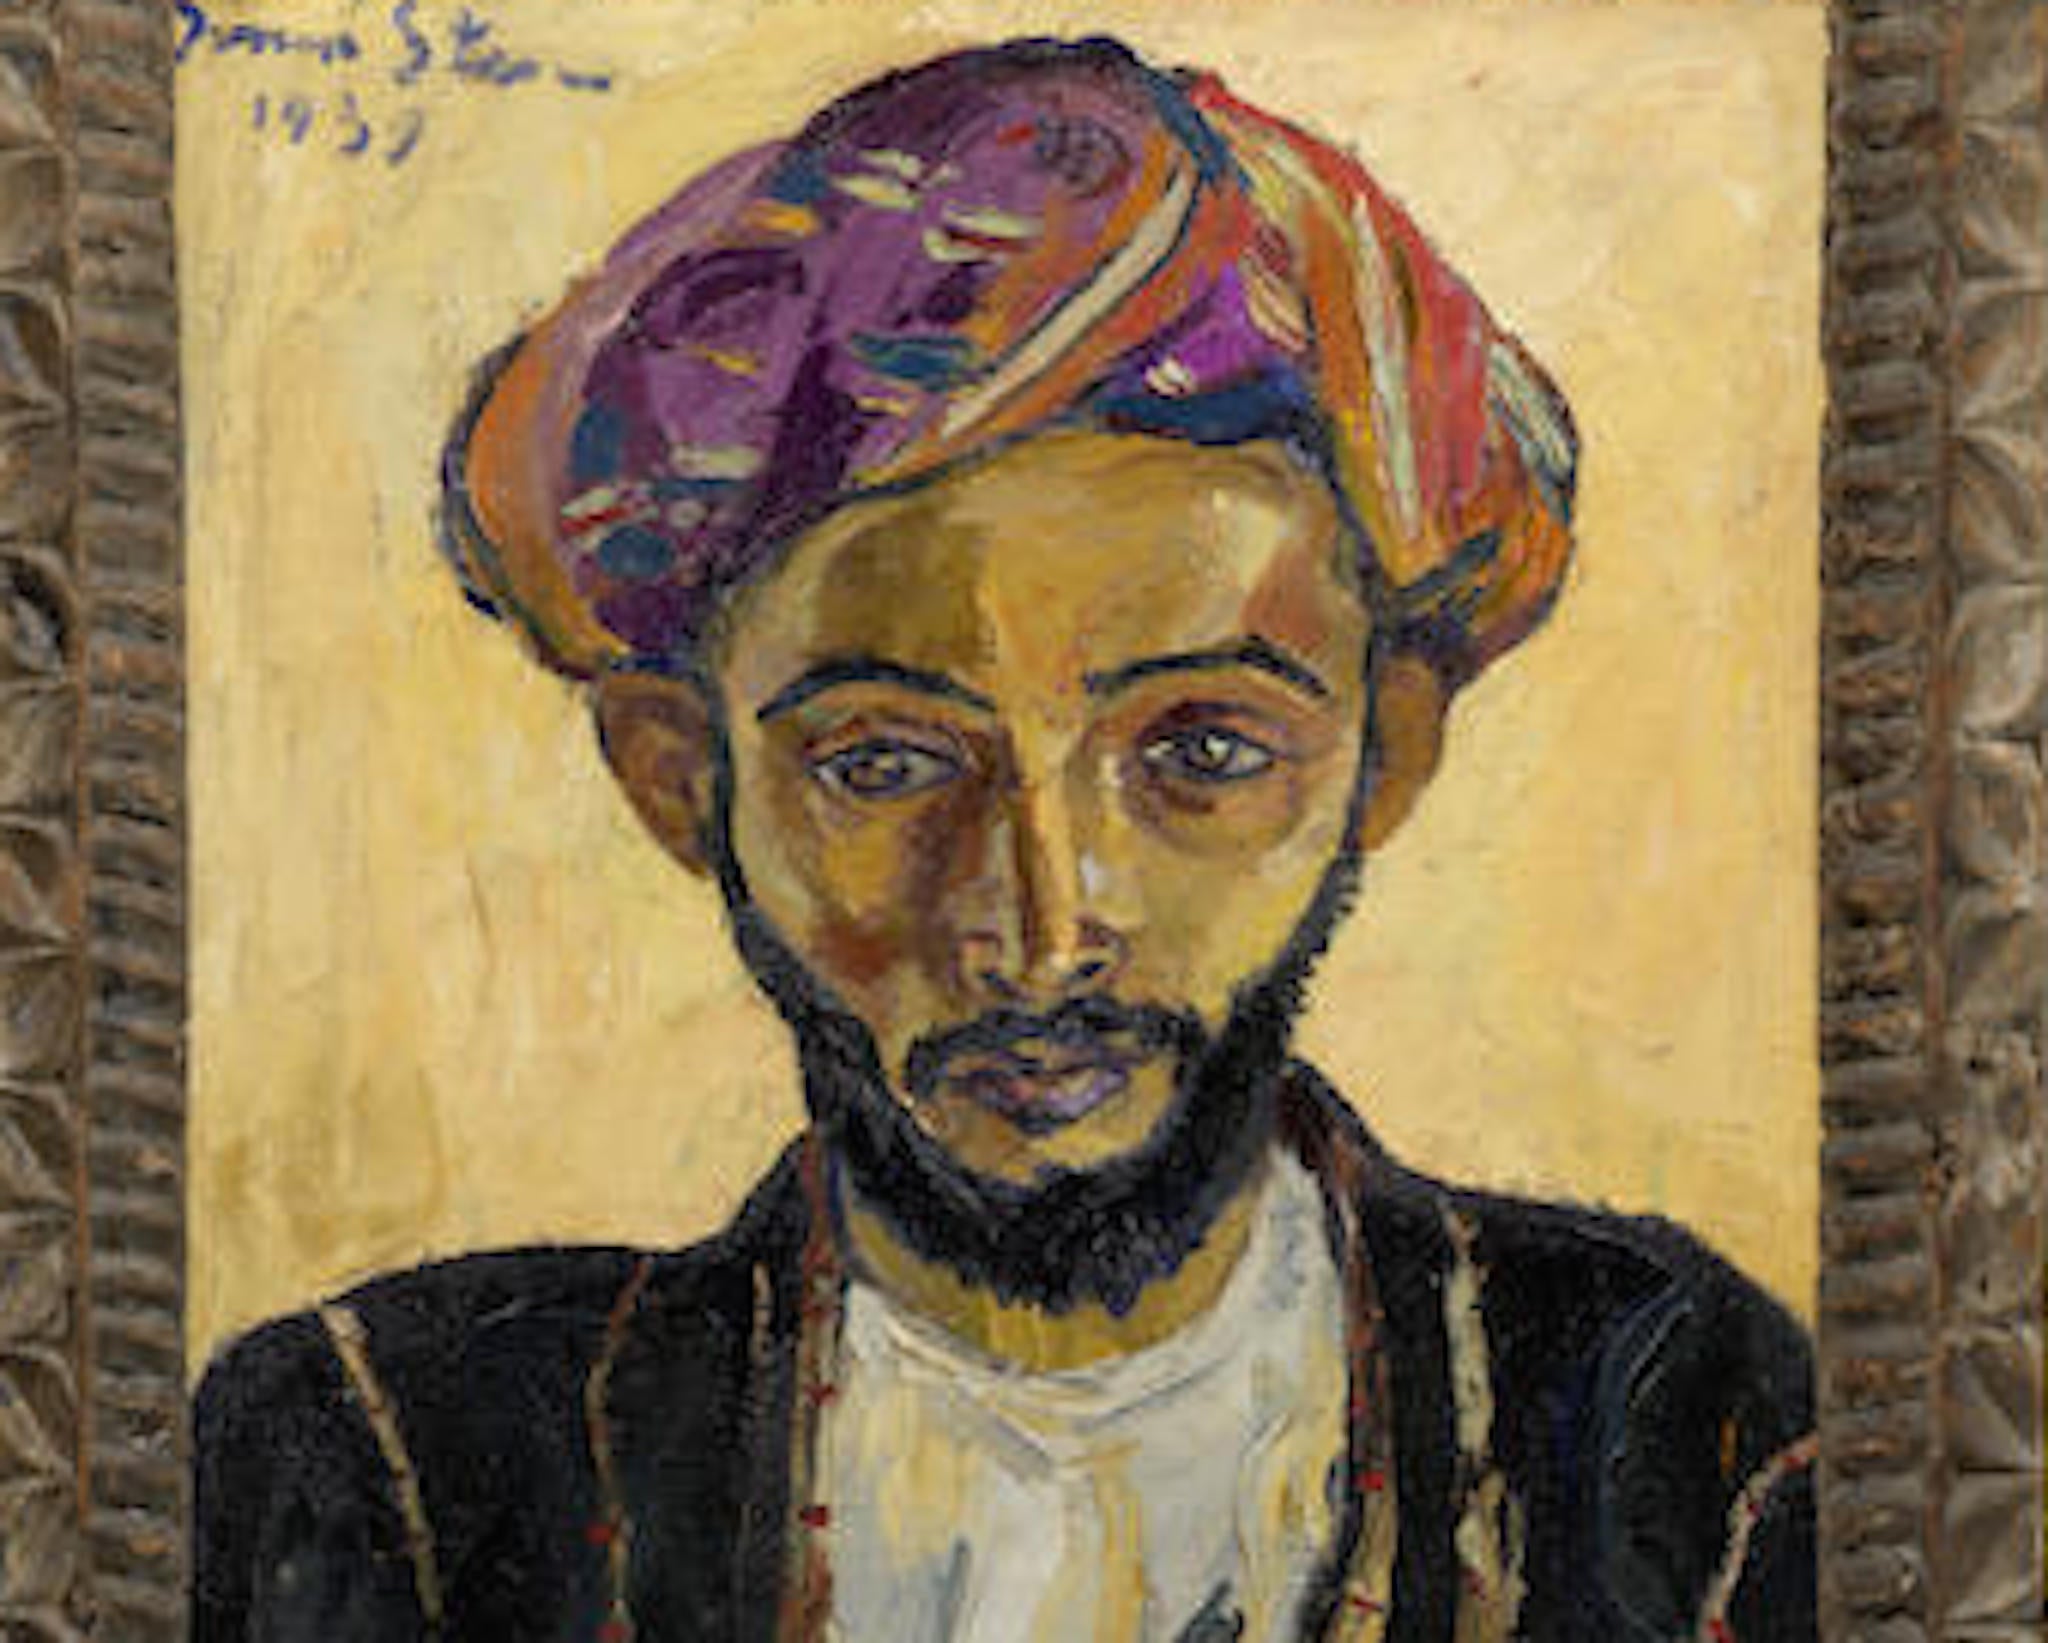 'Arab in Black' by Irma Stern was once sold to help fund Nelson Mandela's legal defence